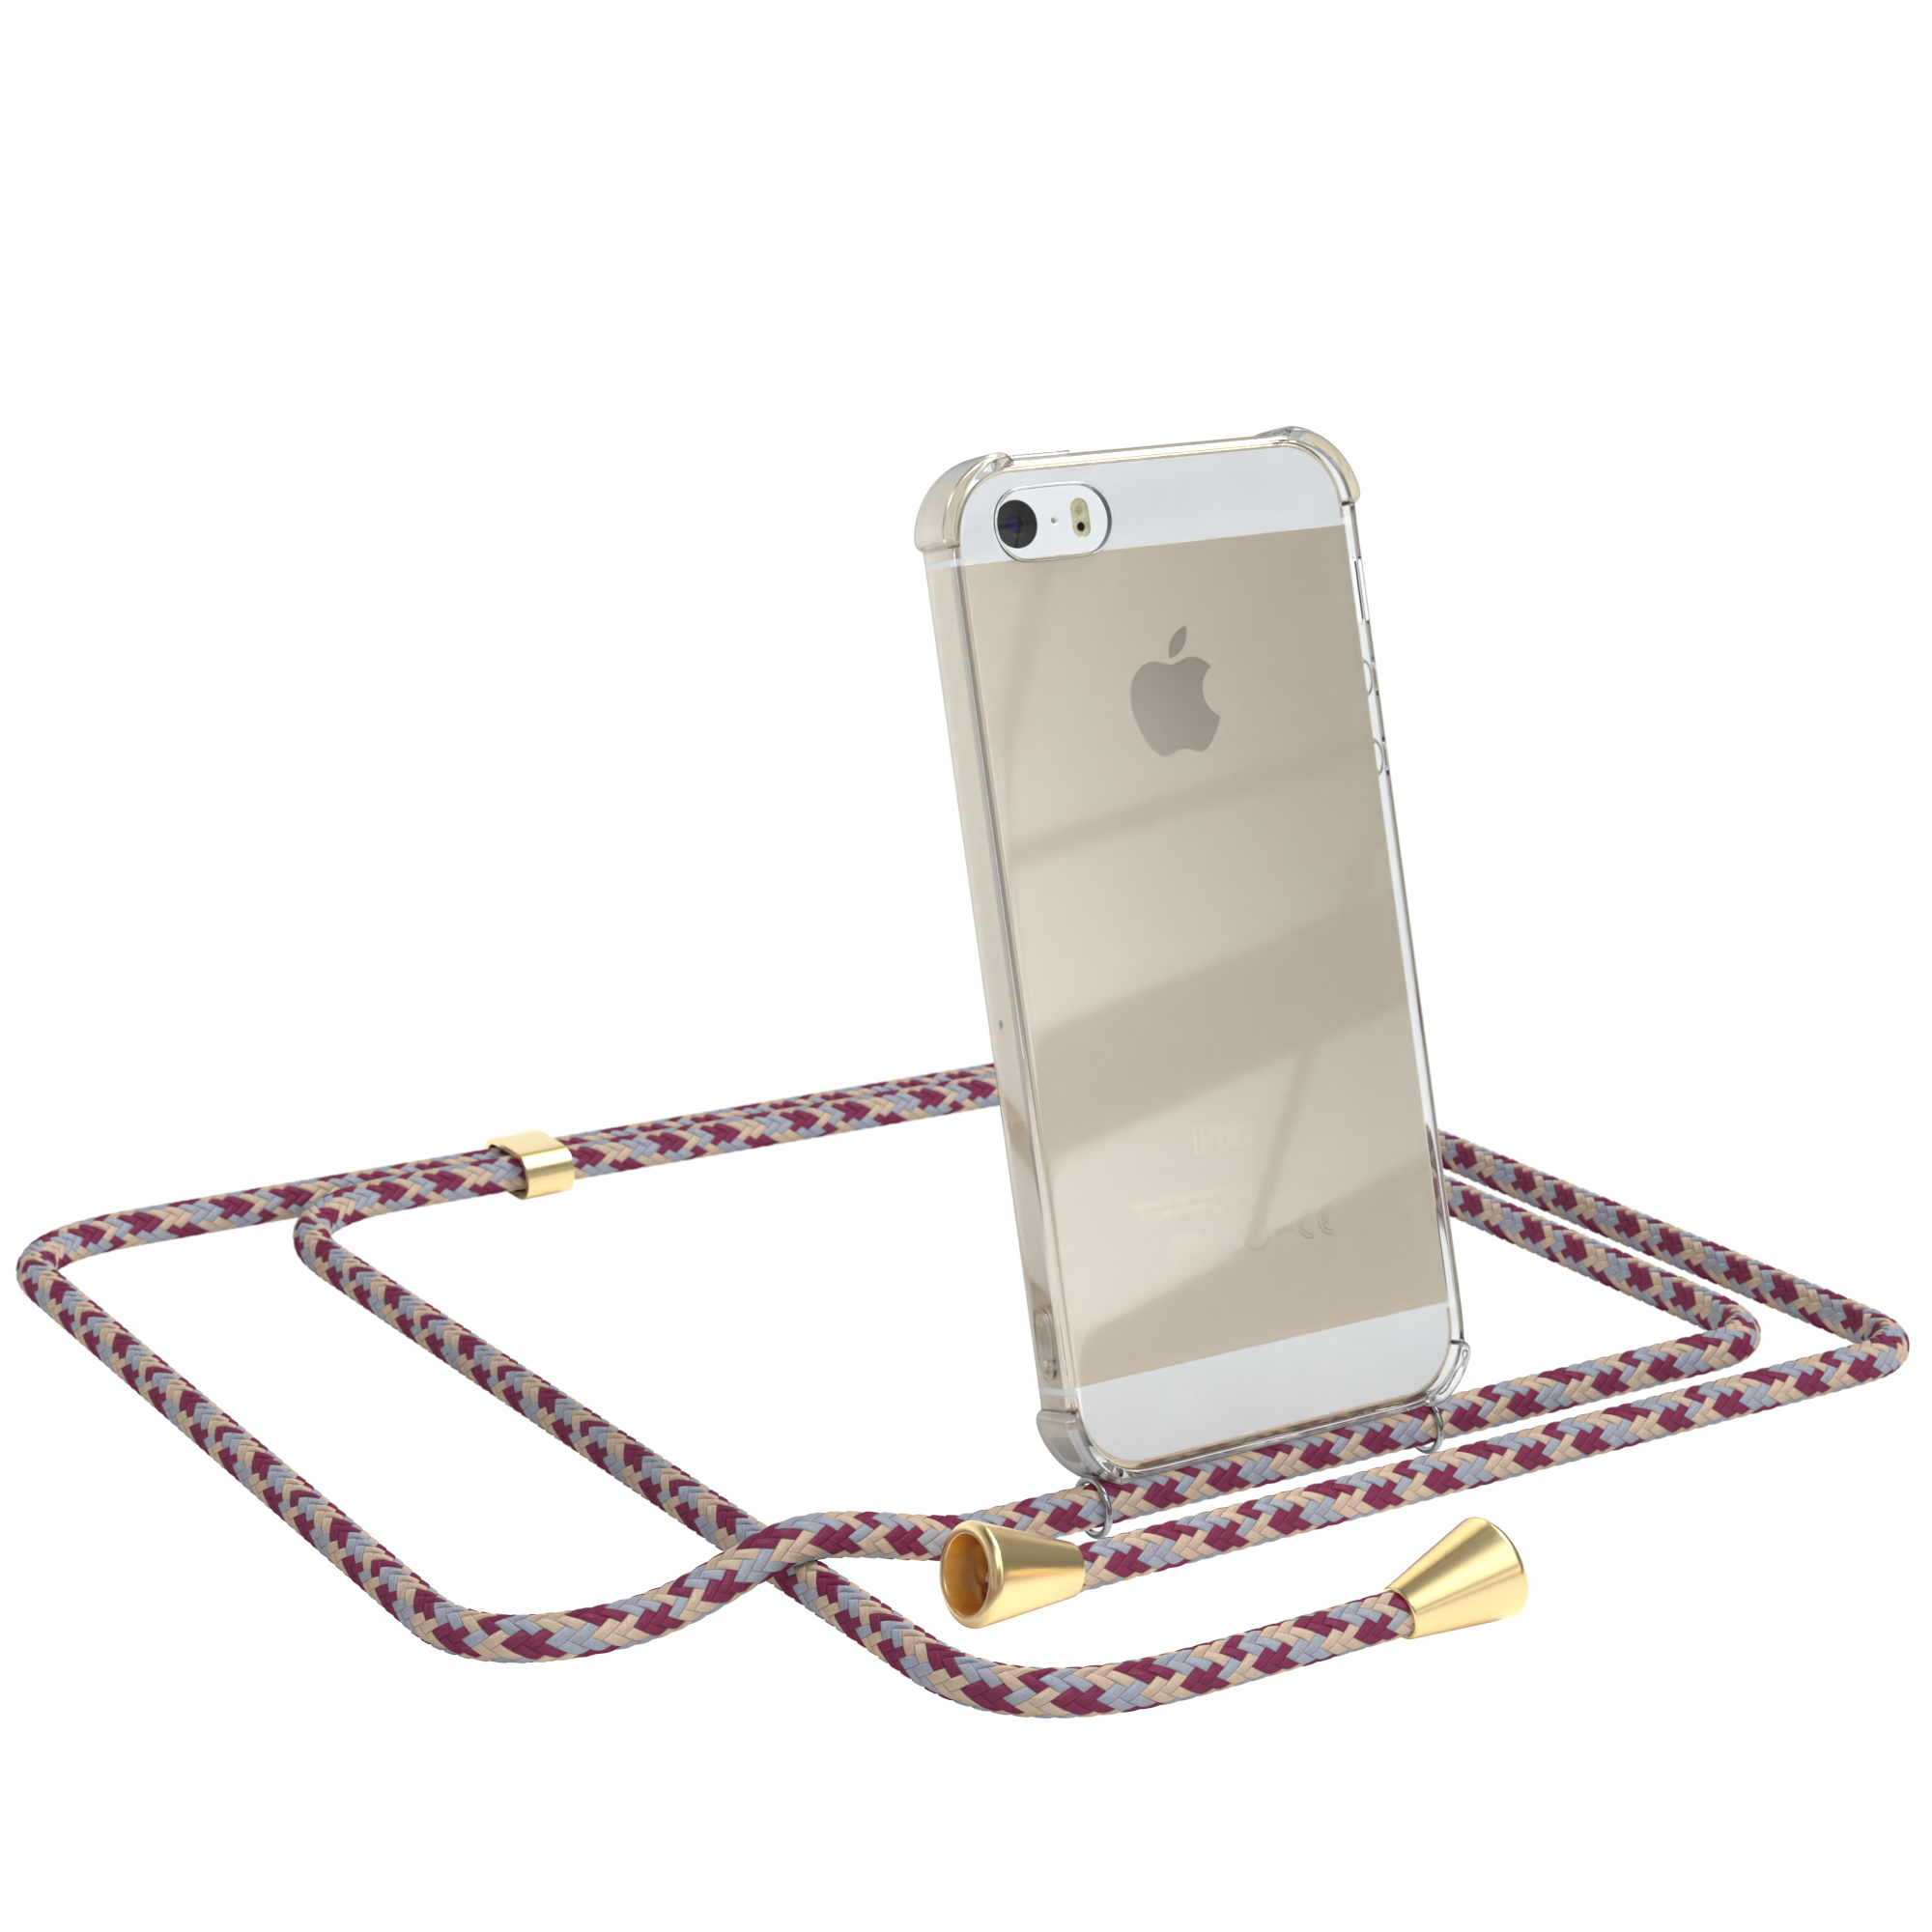 EAZY CASE Clear Cover SE Gold 2016, Umhängetasche, Camouflage mit Clips Apple, Rot Beige iPhone / / Umhängeband, iPhone 5S, 5